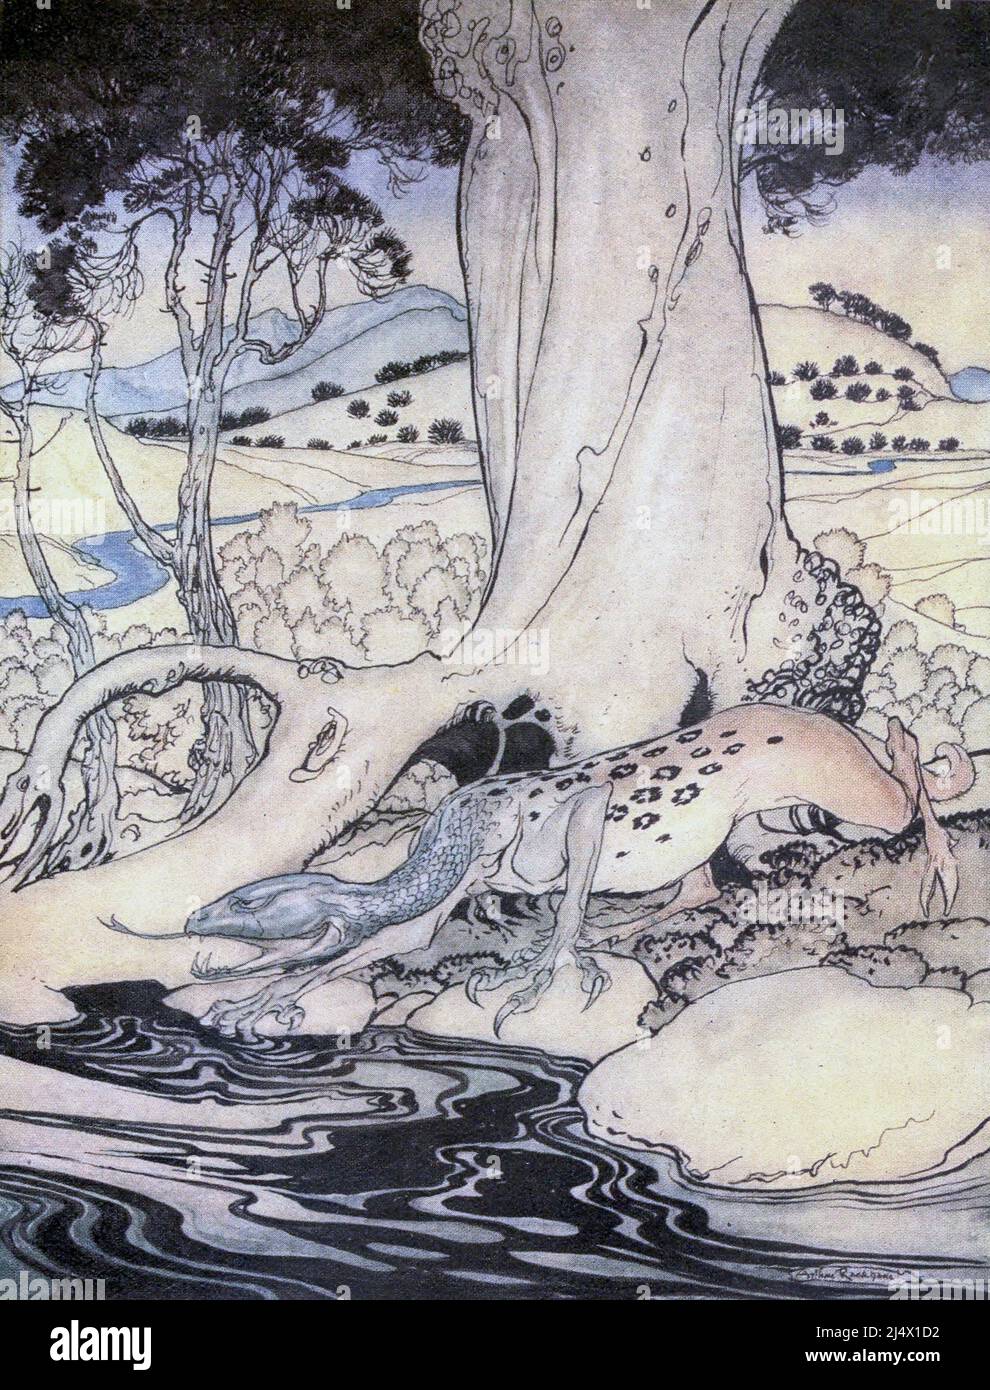 The Questing Beast From the Book ' The romance of King Arthur and his knights of the Round Table ' Abridged from Sir Thomas Malory's Morte D'Arhur by Alfred W. Pollard Illustrated by Arthur Rackham Publisher New York : Macmillan 1920 Stock Photo